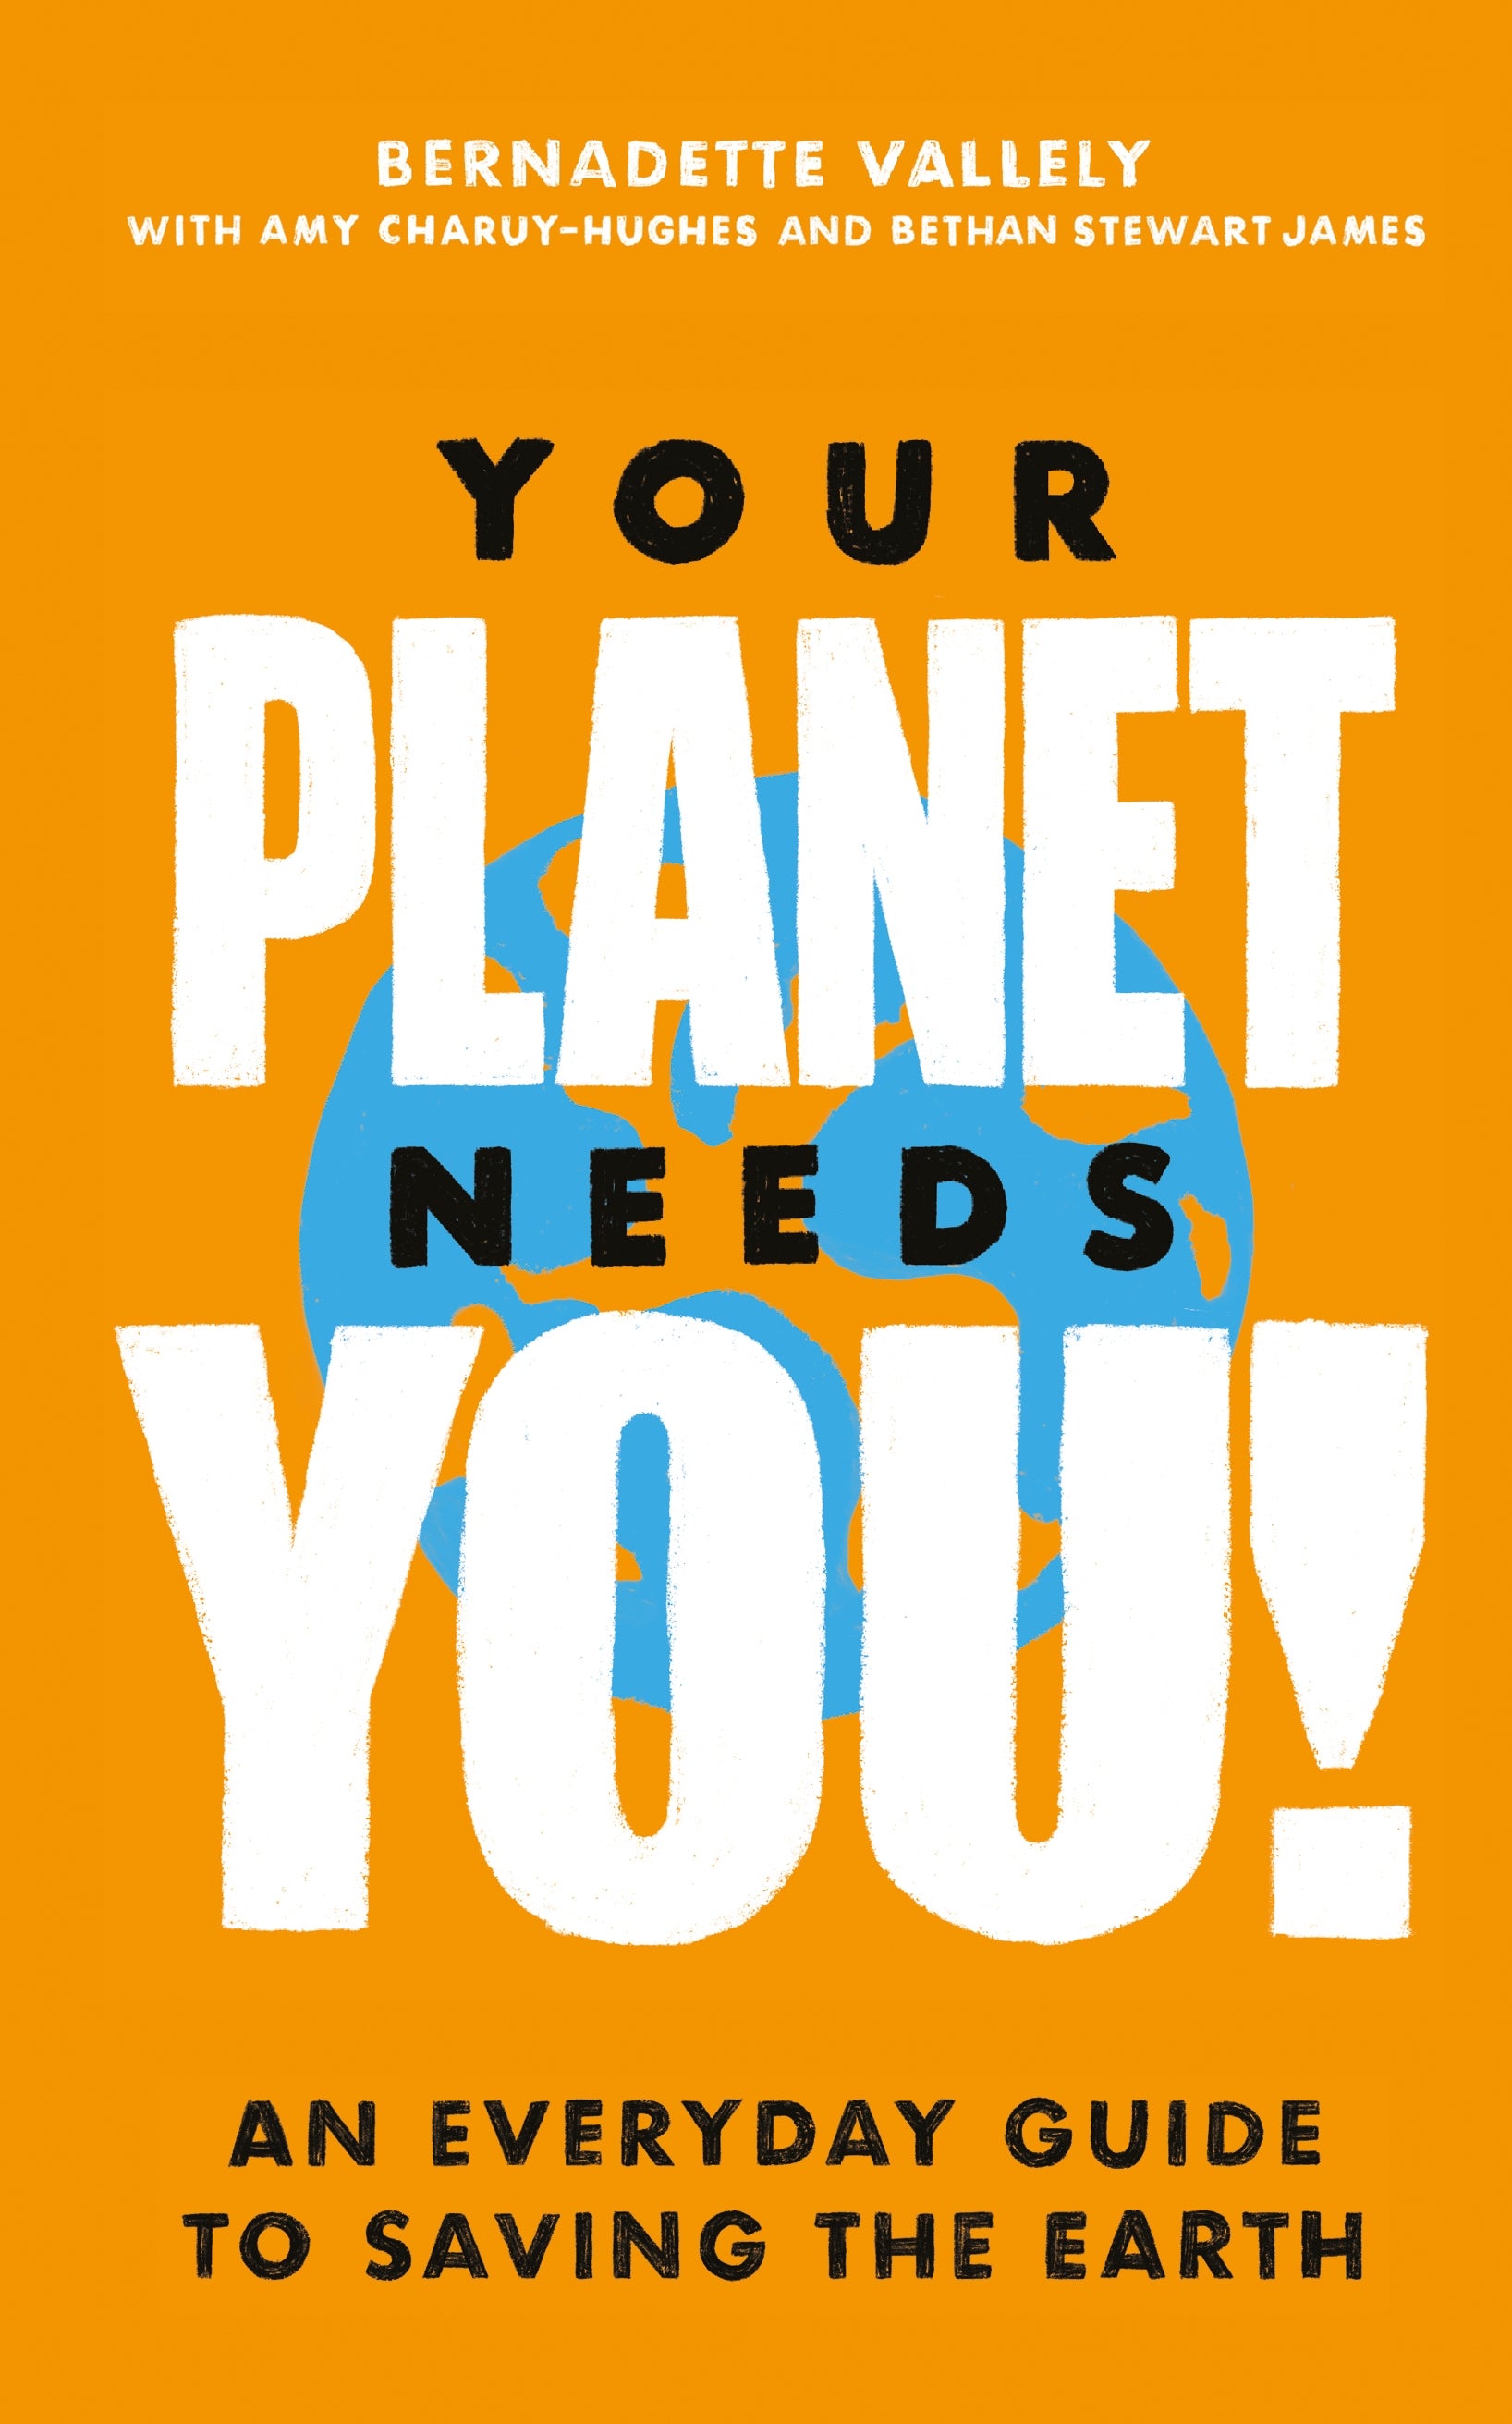 Your Planet Needs You!: An everyday guide to saving the earth by Bernadette Vallely, Amy Charuy-Hughes, Bethan Stewart James